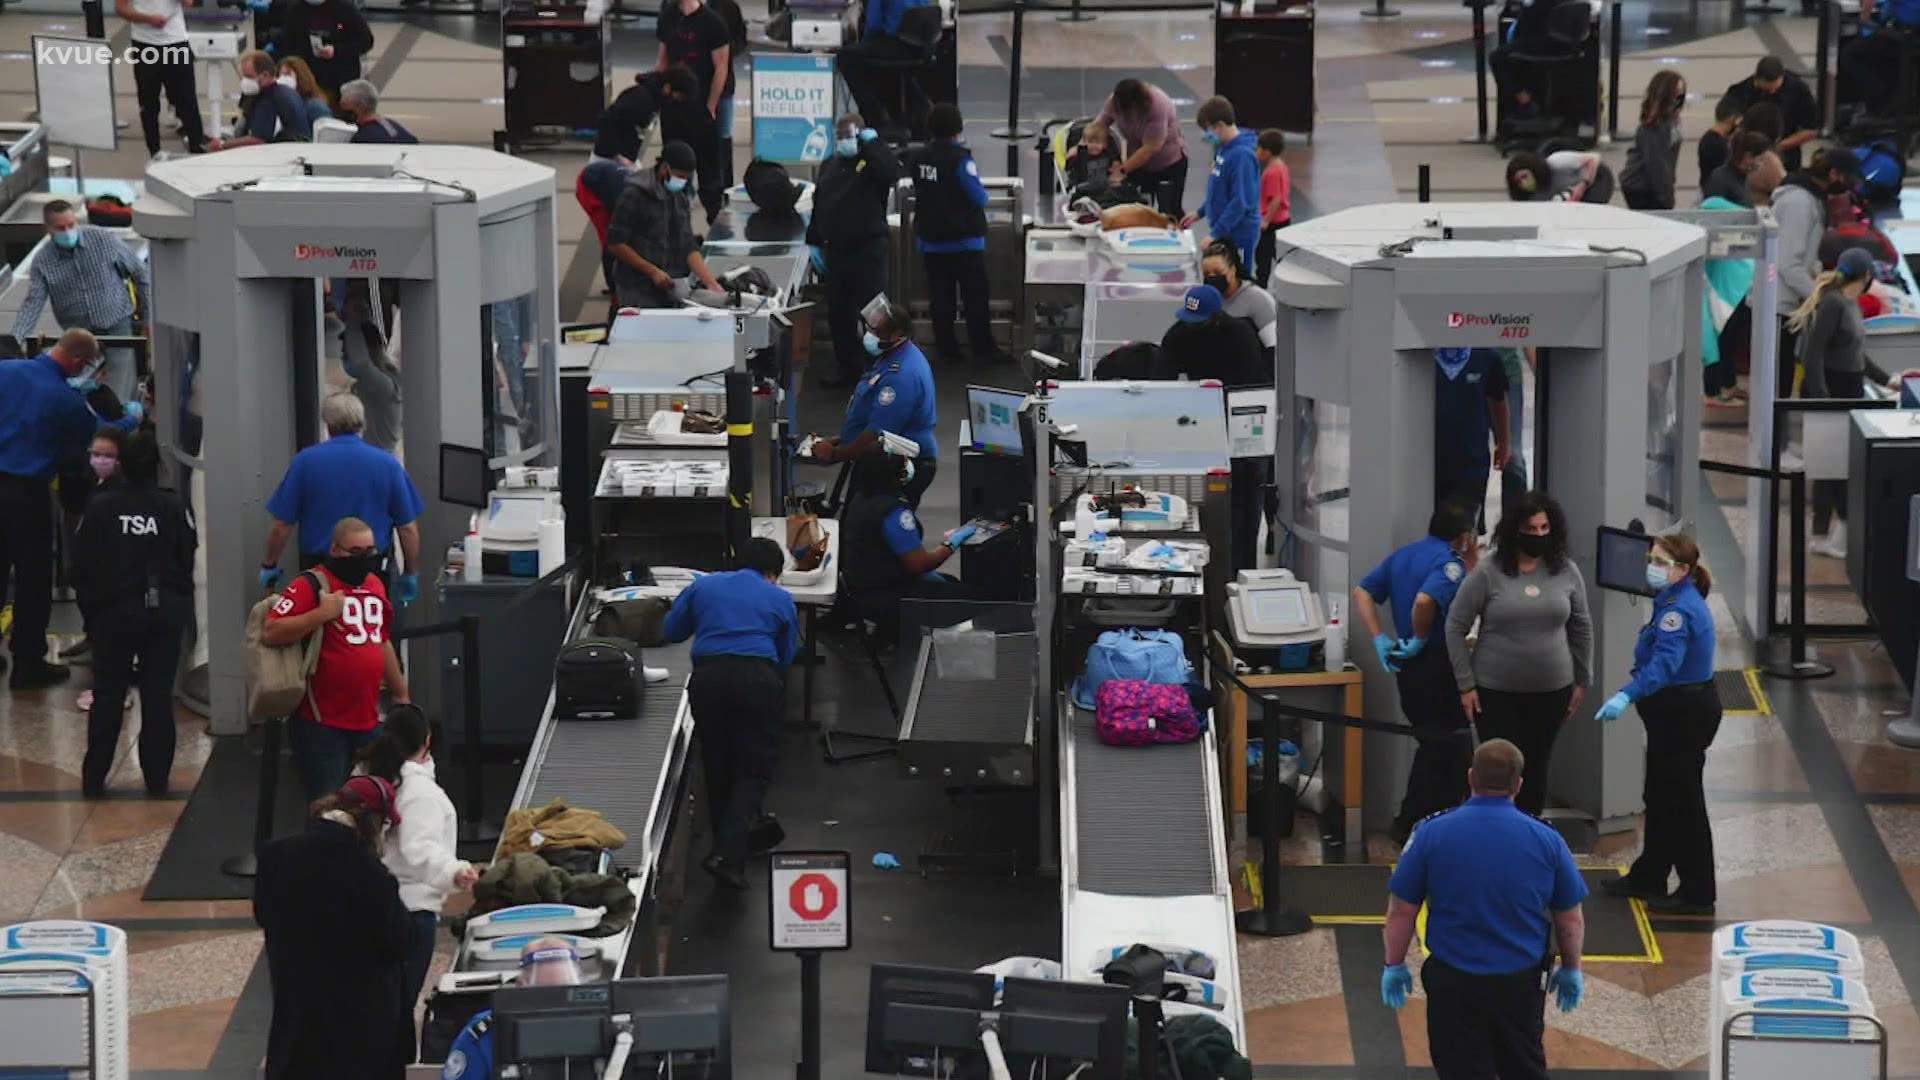 The TSA has seen more people they've seen in a long time in Austin.